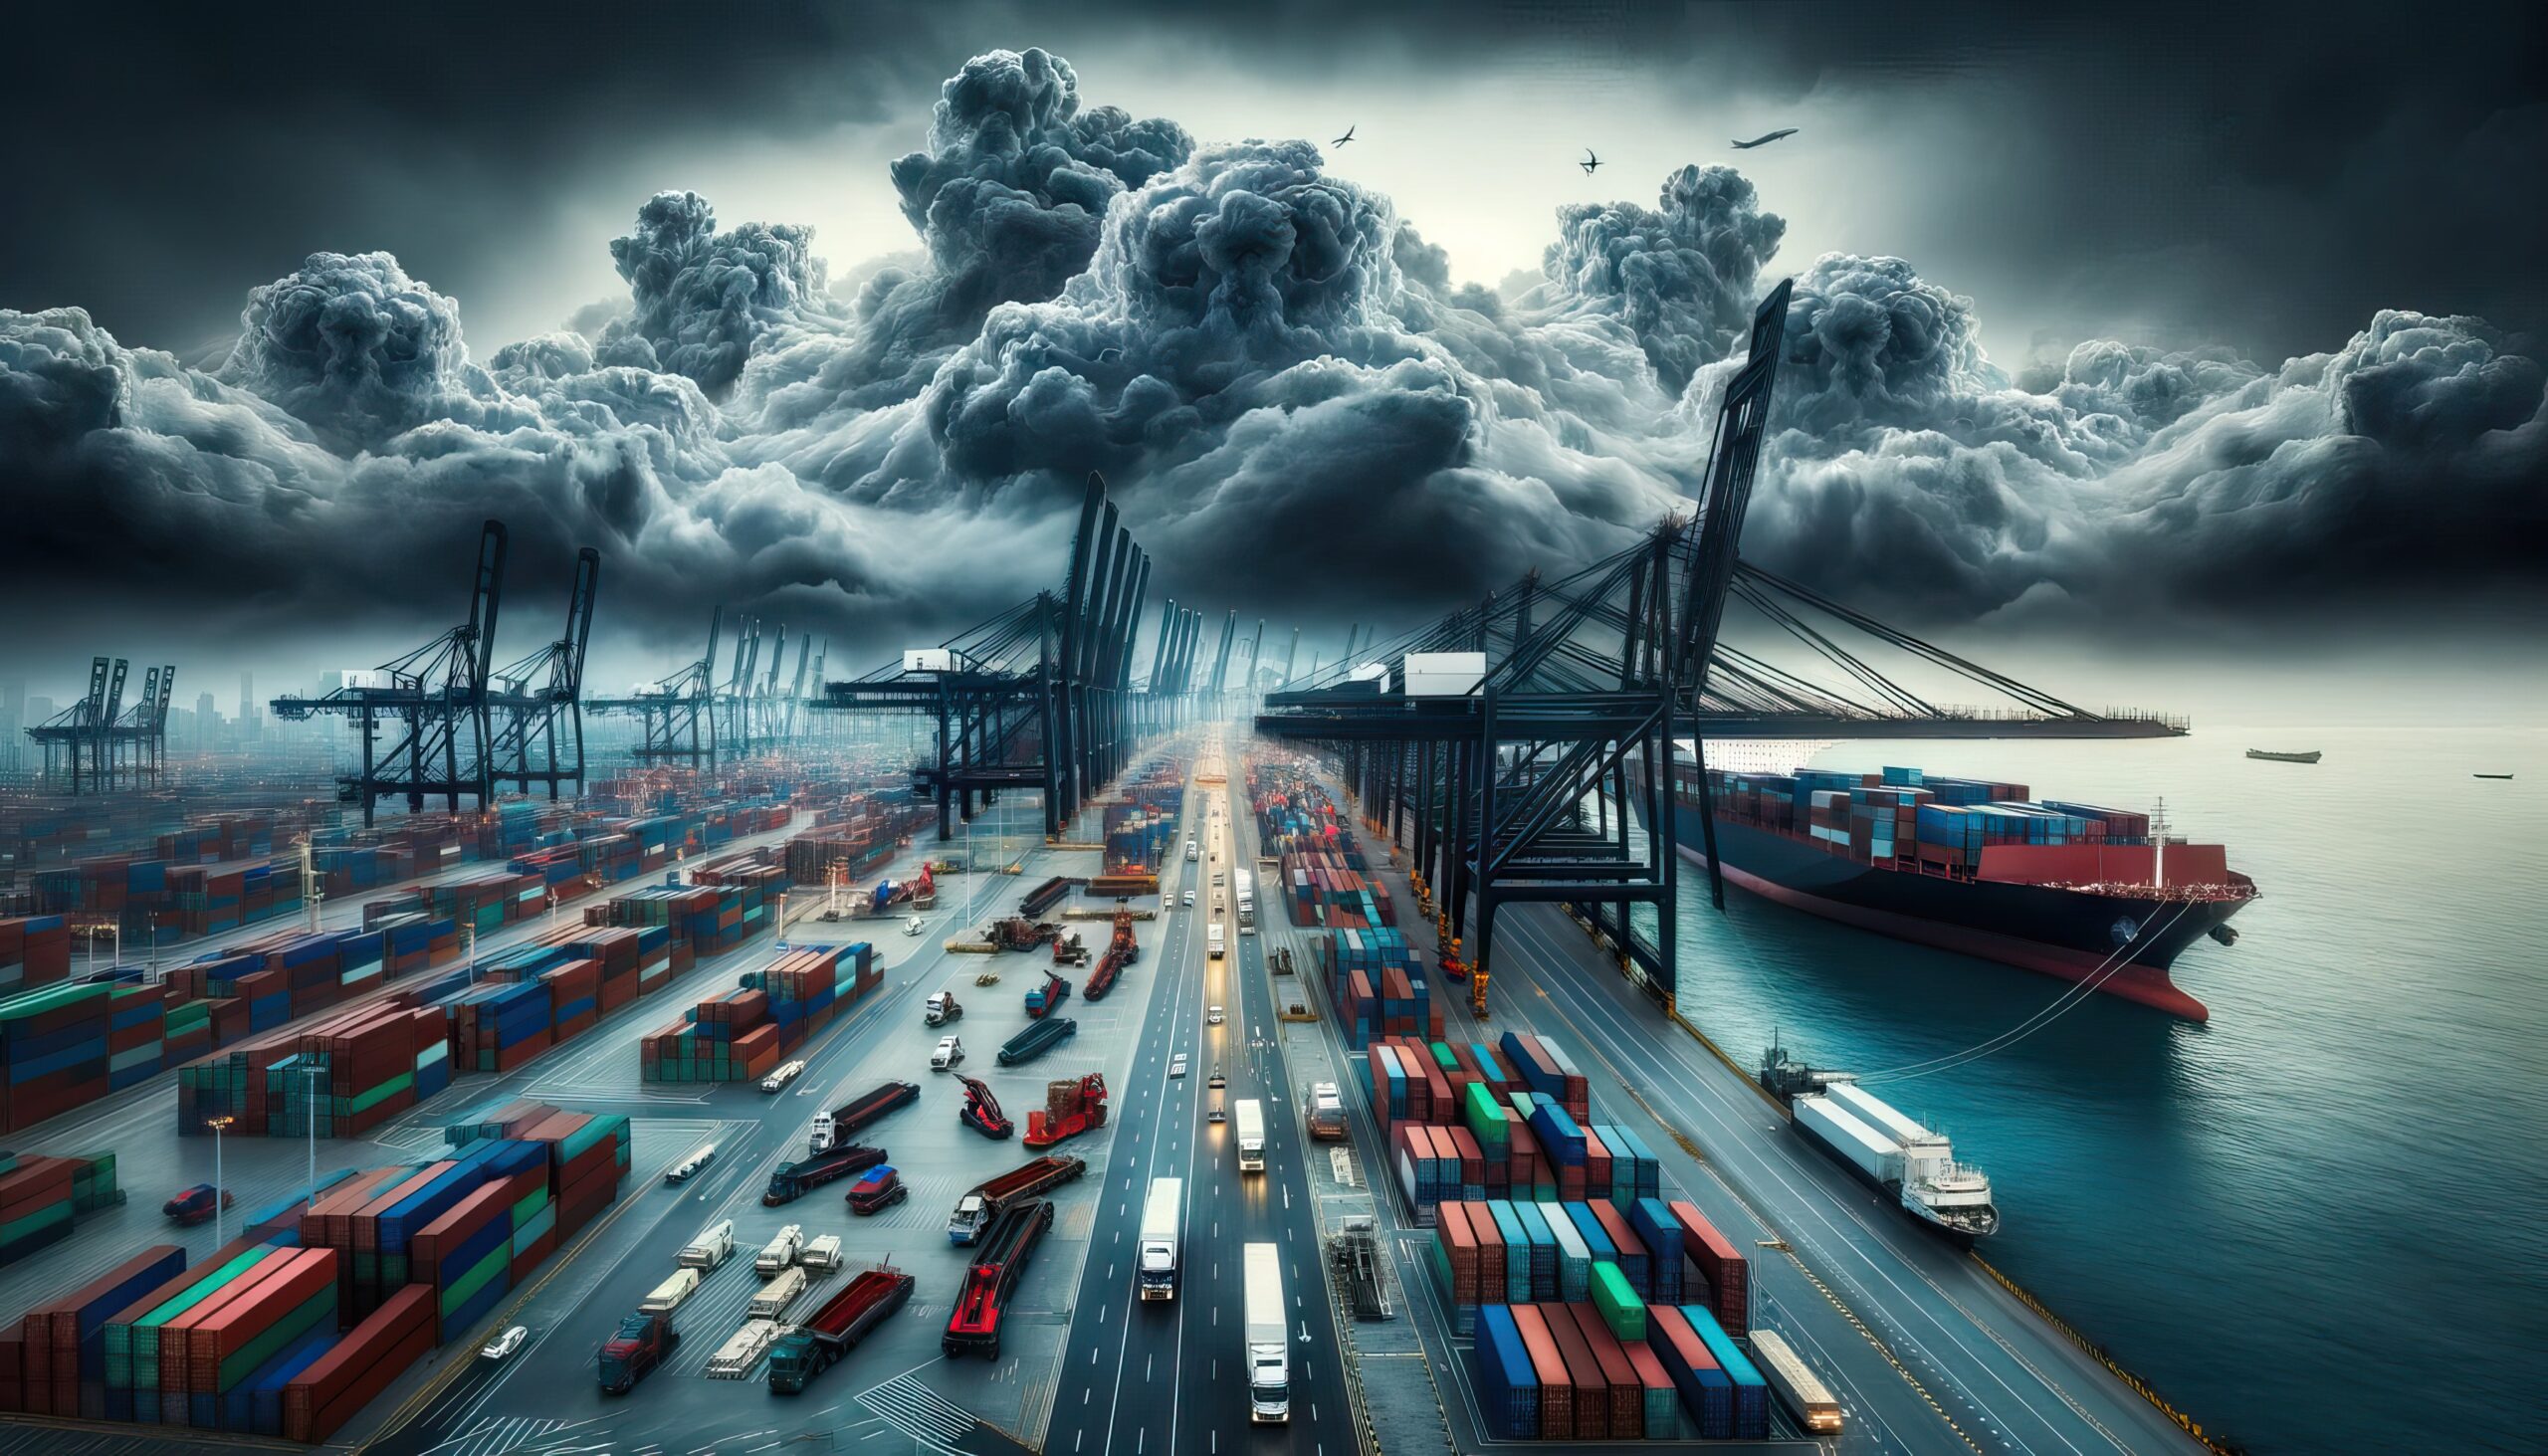 Supply Chain Storm: Insights on Blanked Sailings and Europe’s Economic Impact